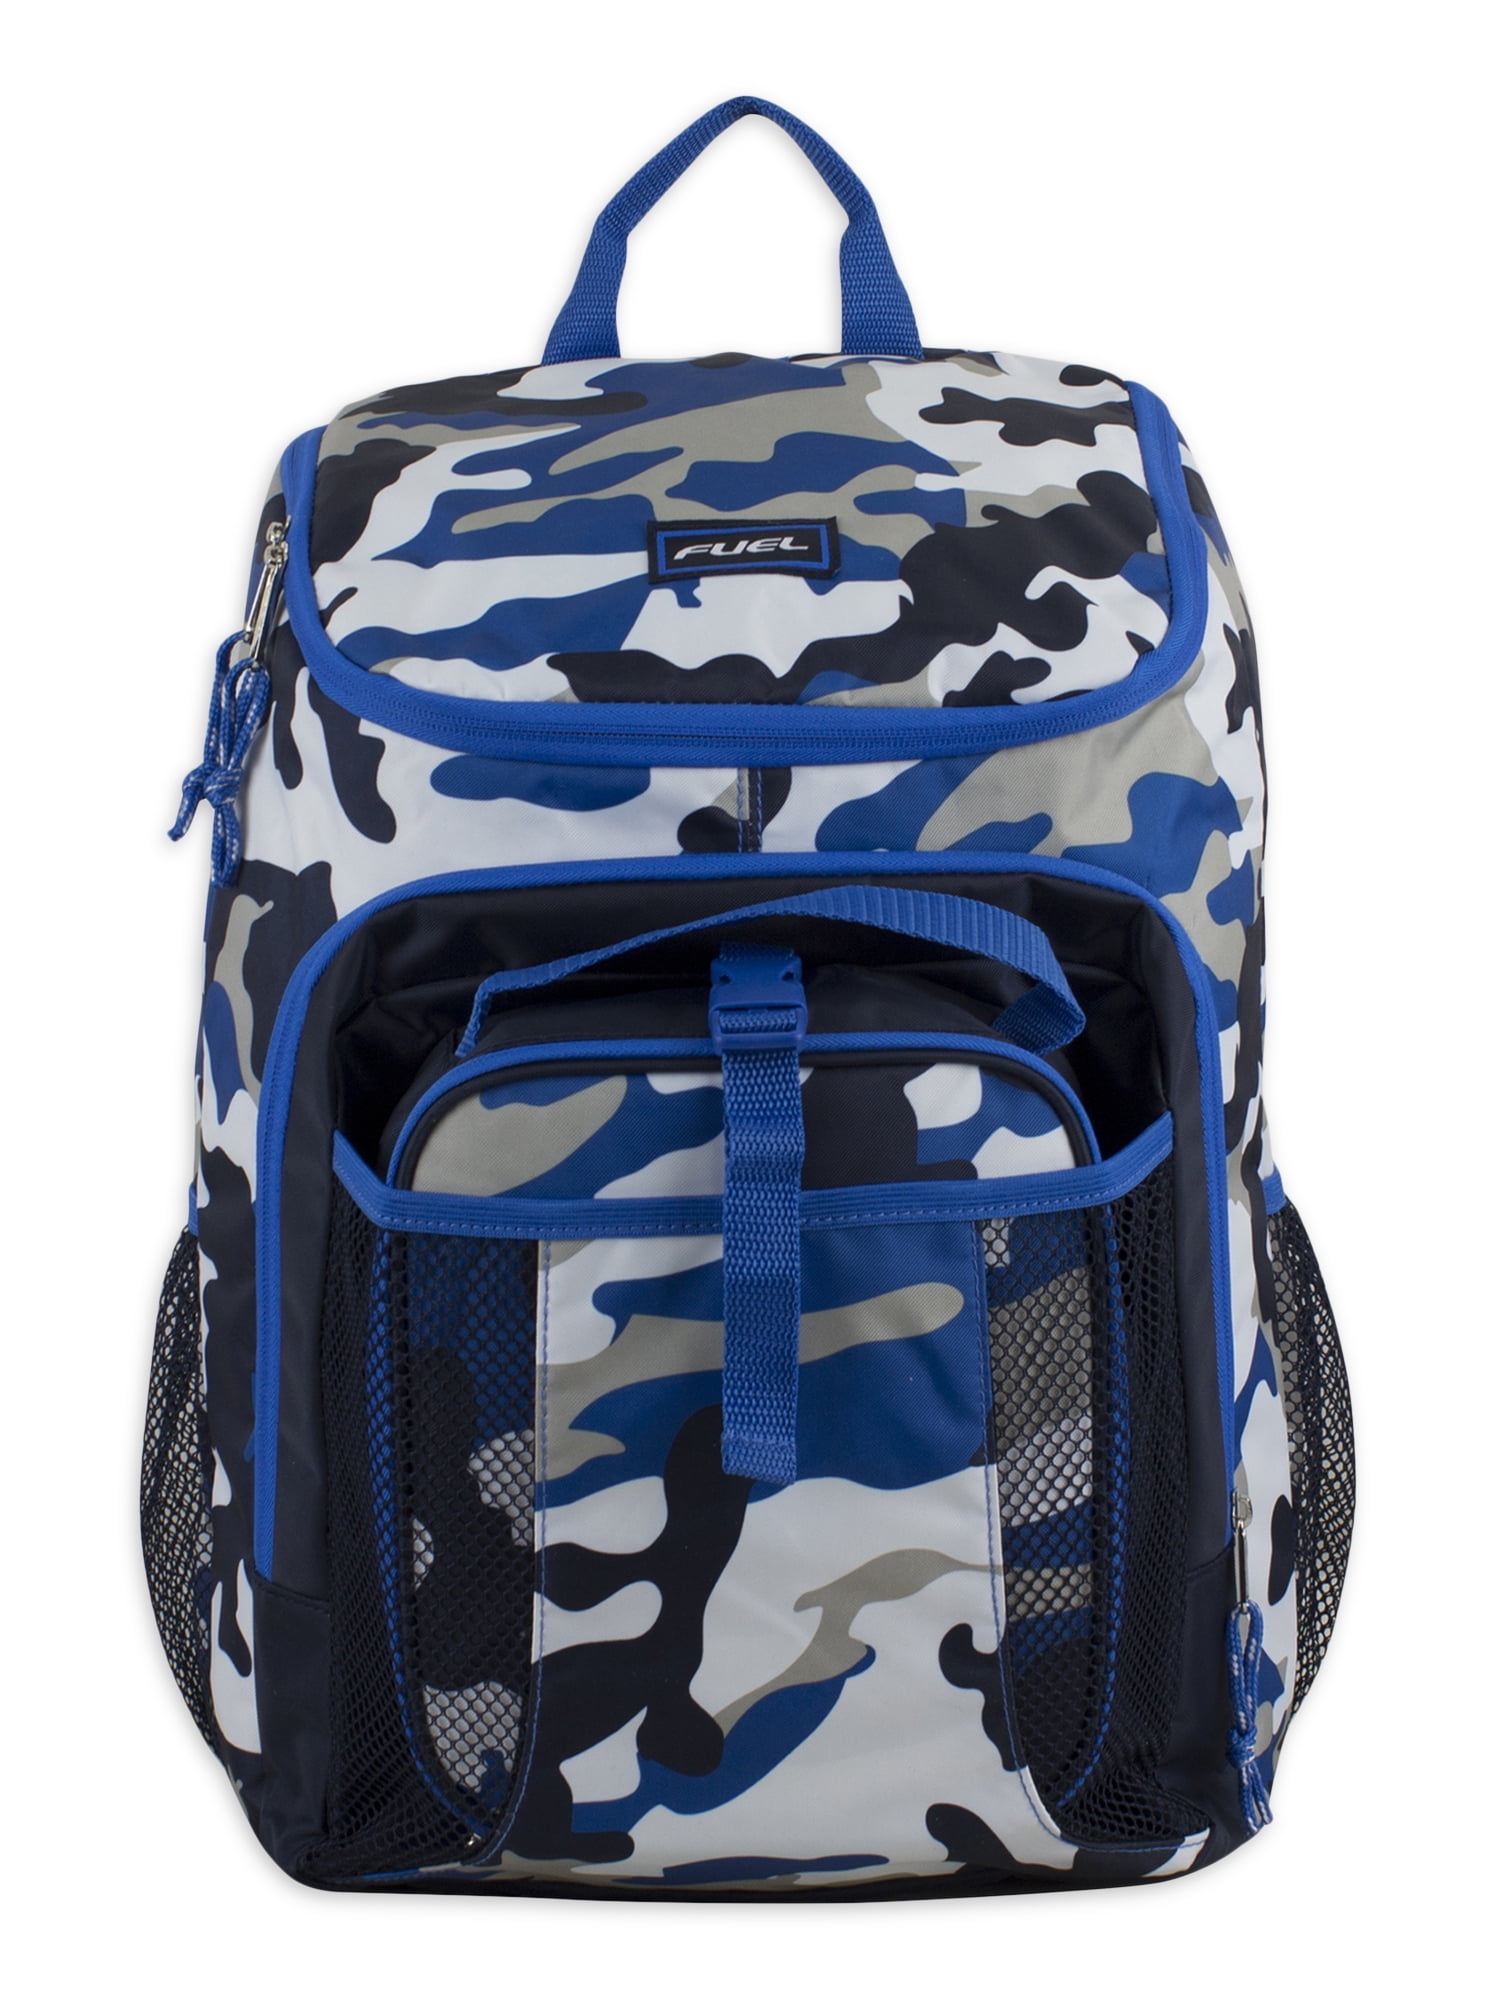 Kid's Quilted Camo Backpack & Lunch Box Set - Navy - Navy